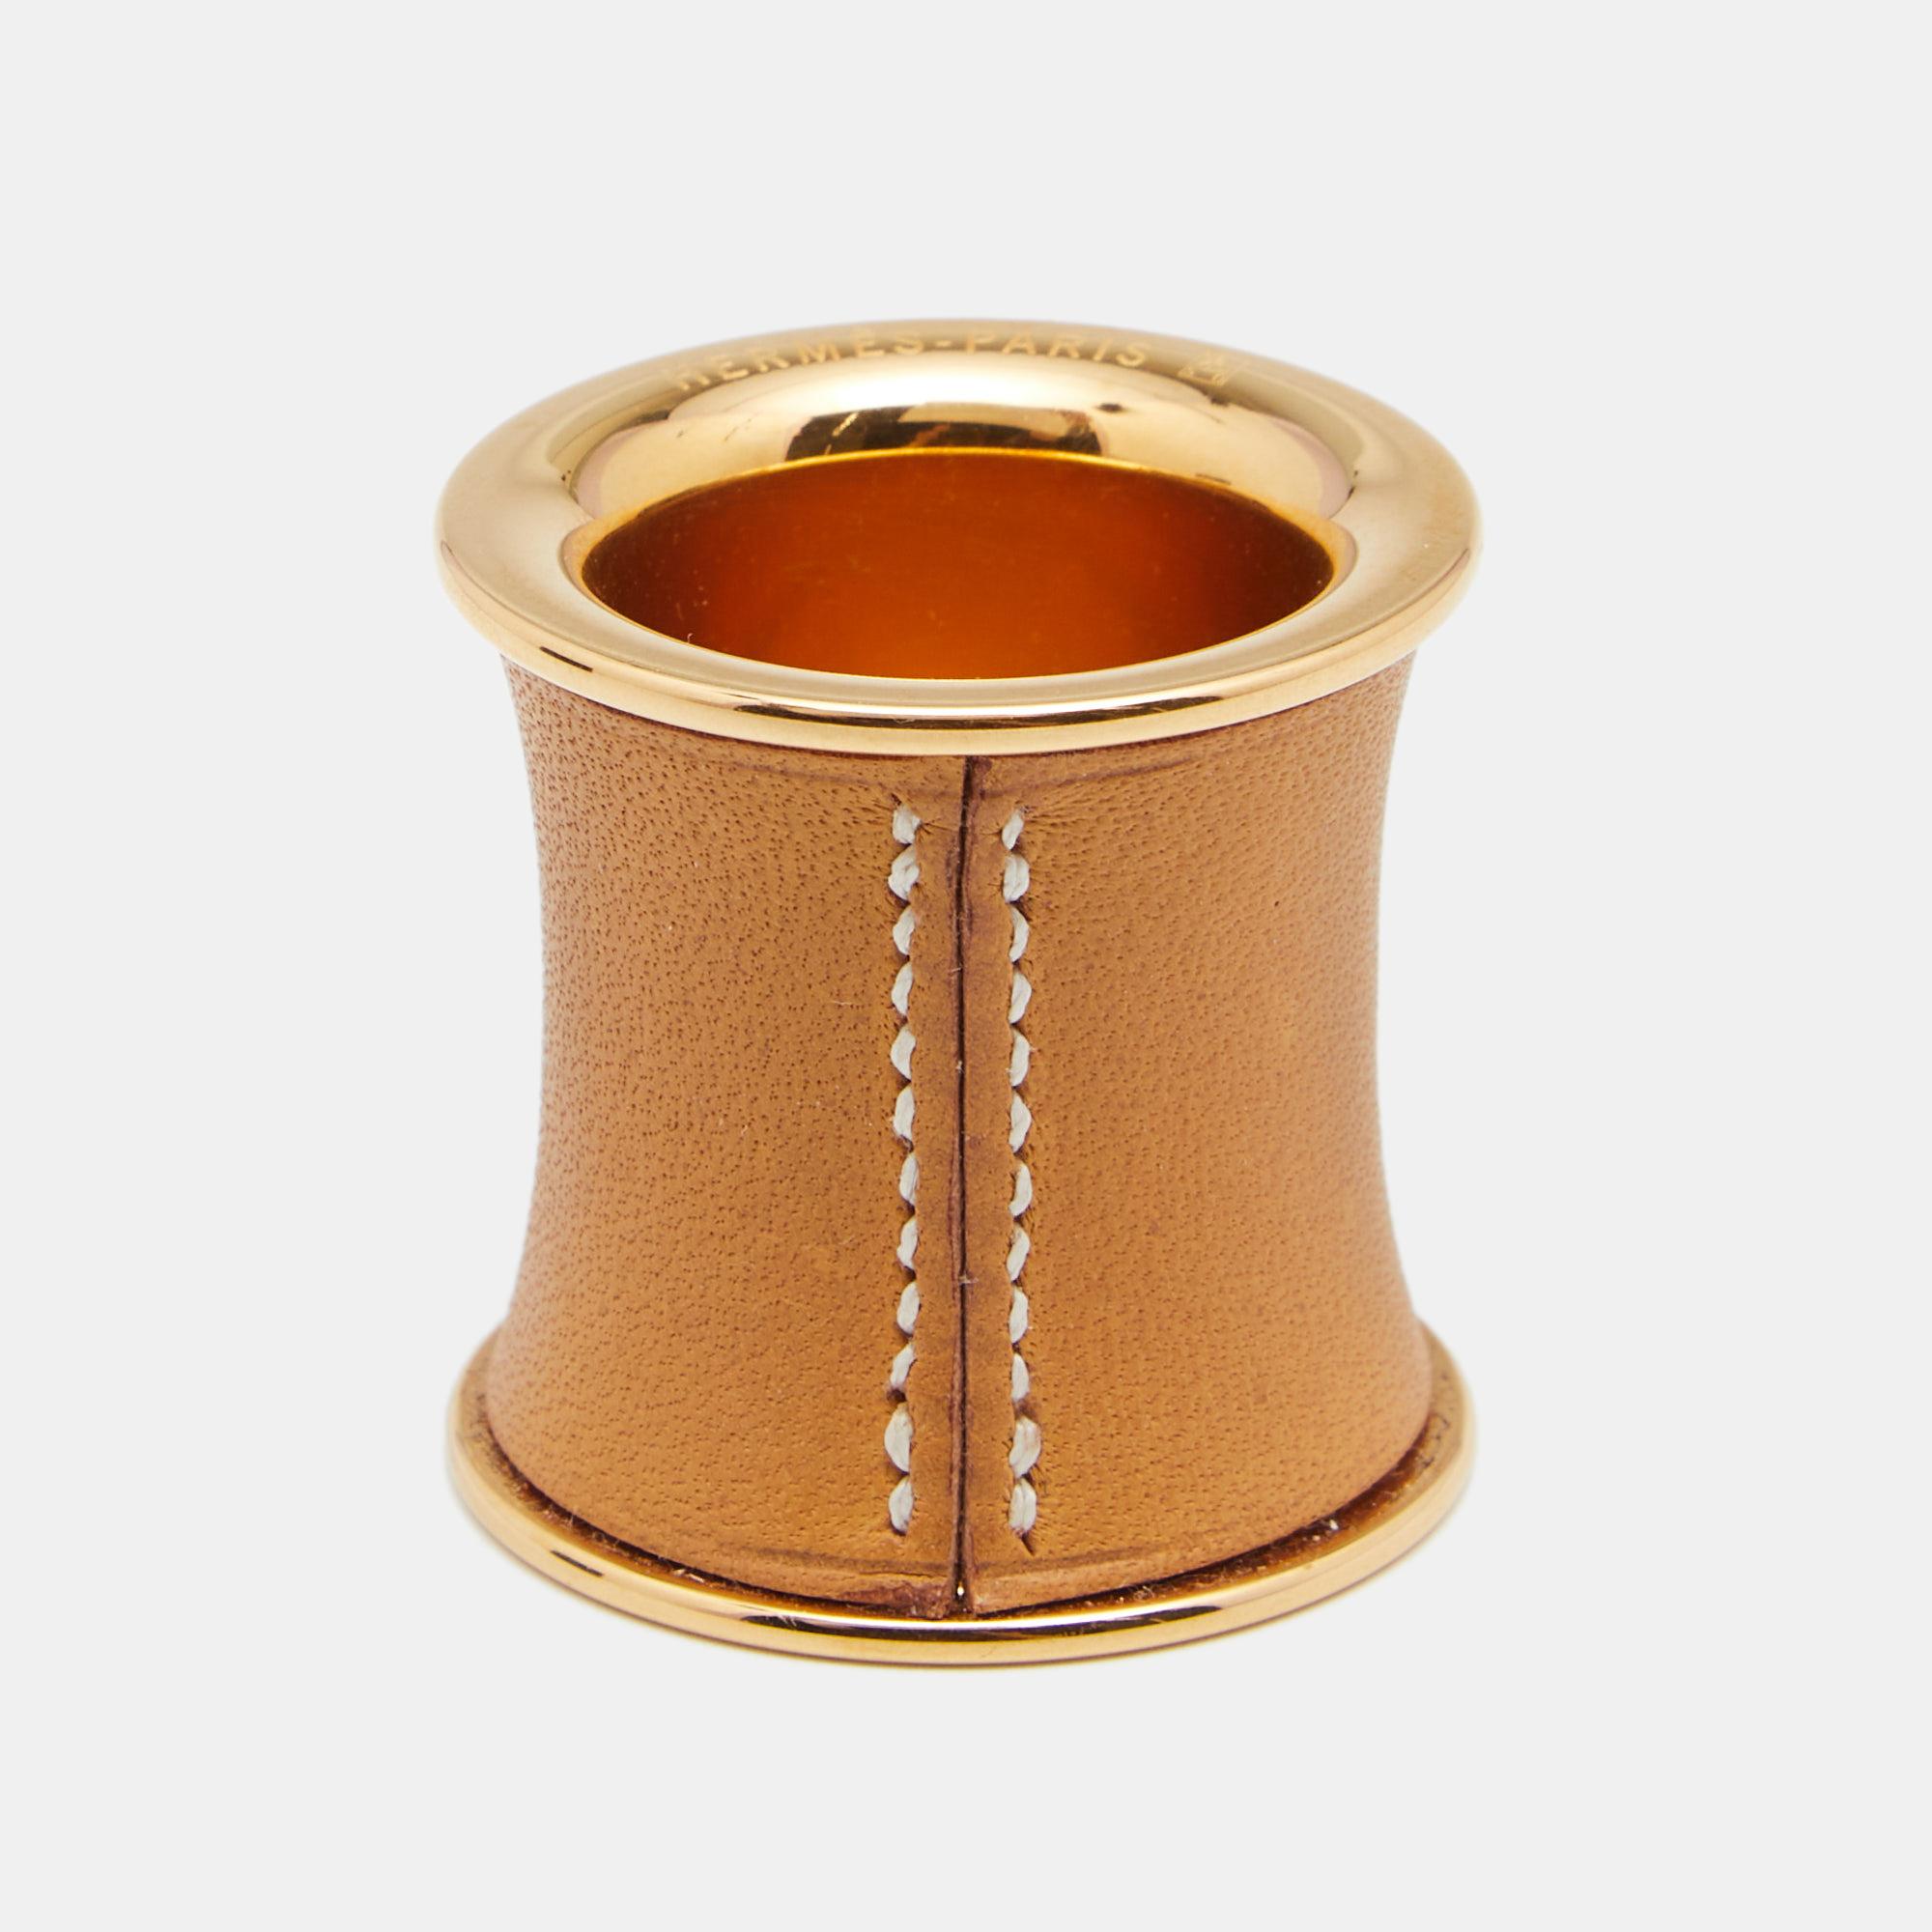 Use this elegant and valuable piece by Hermès to secure your favorite scarf ties in style! The ring is crafted from gold-plated metal and is accentuated with a brown leather covering. Replace the knot with this chic ring for a simpler and more